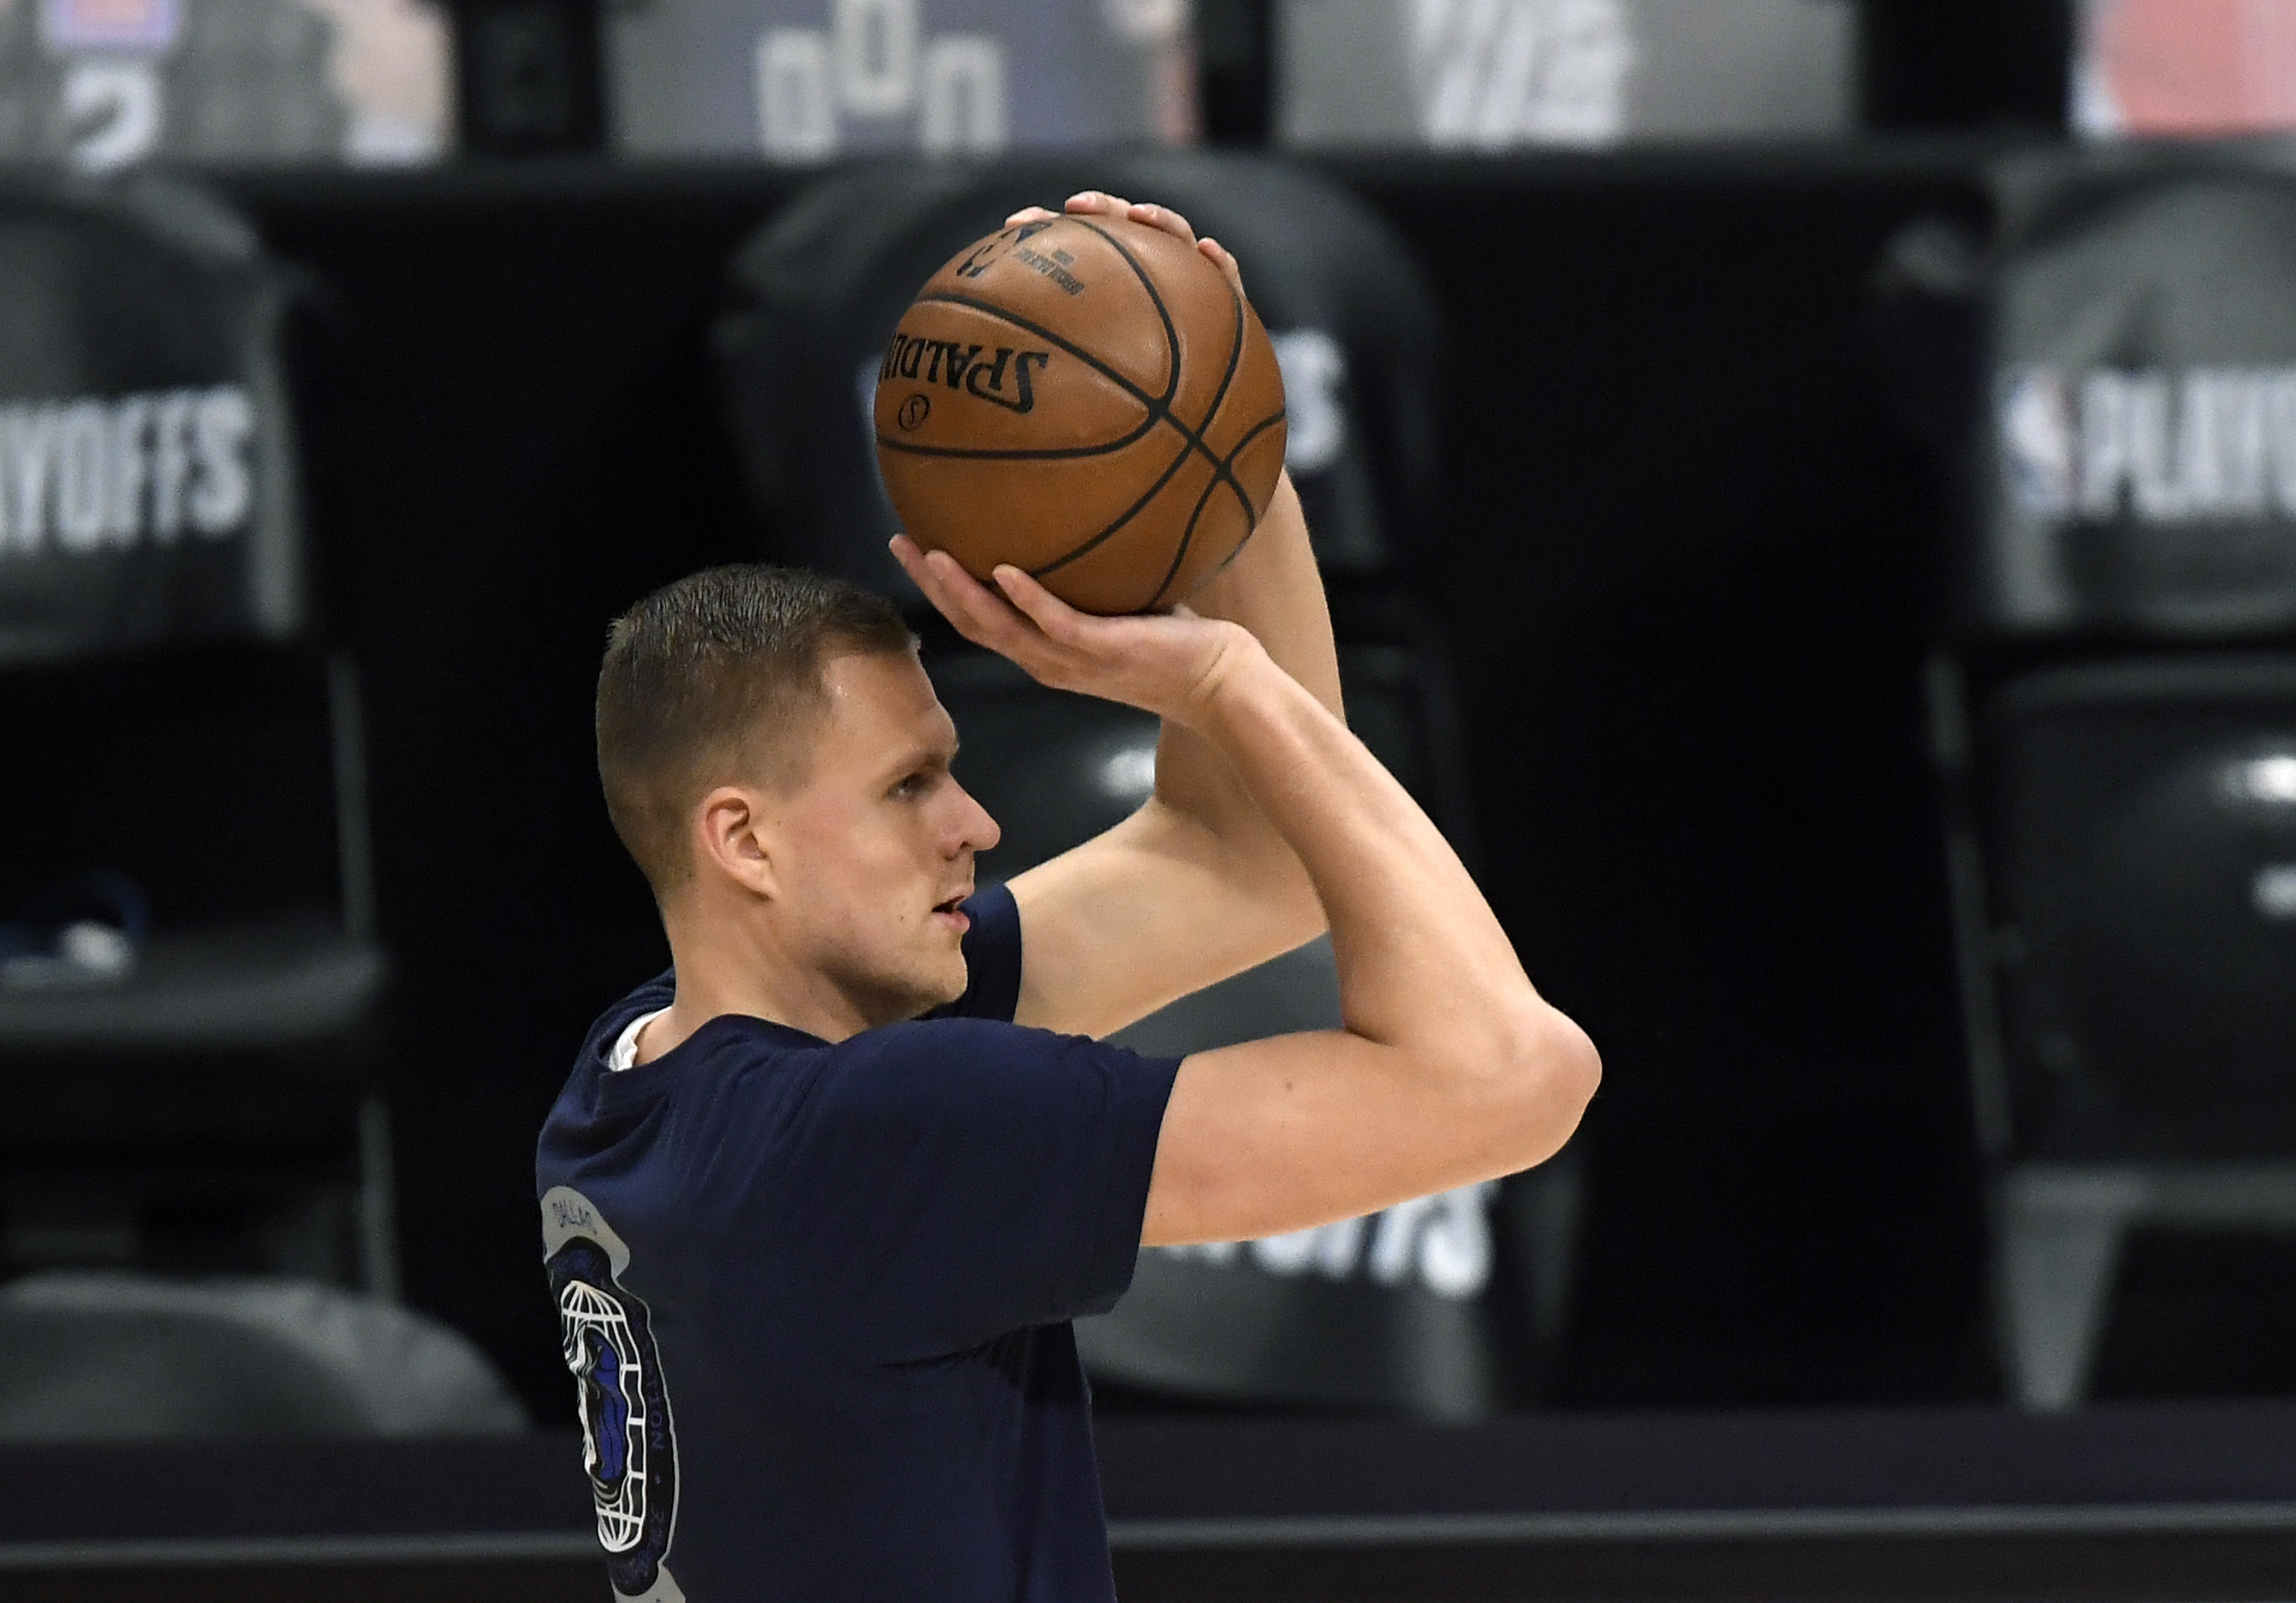 Kristaps Porzingis shoots warmup jumpers prior to the start of Game 7 against the Clippers.